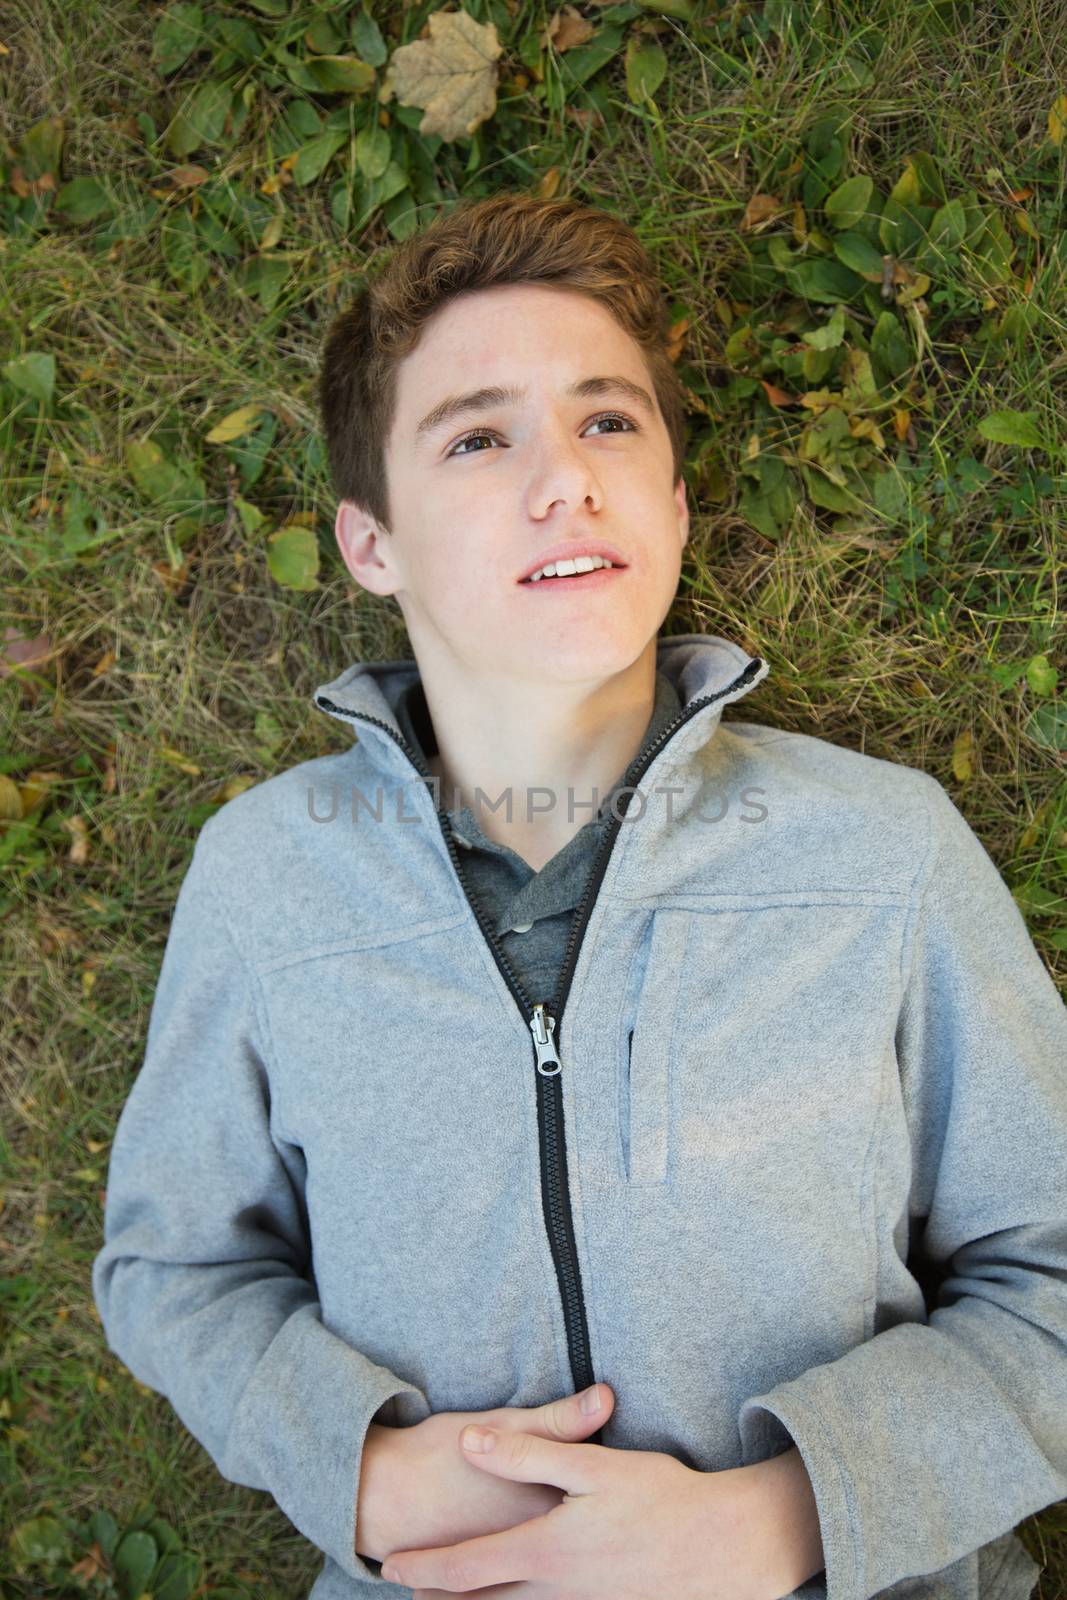 Caucasian teenager laying down on grass looking up